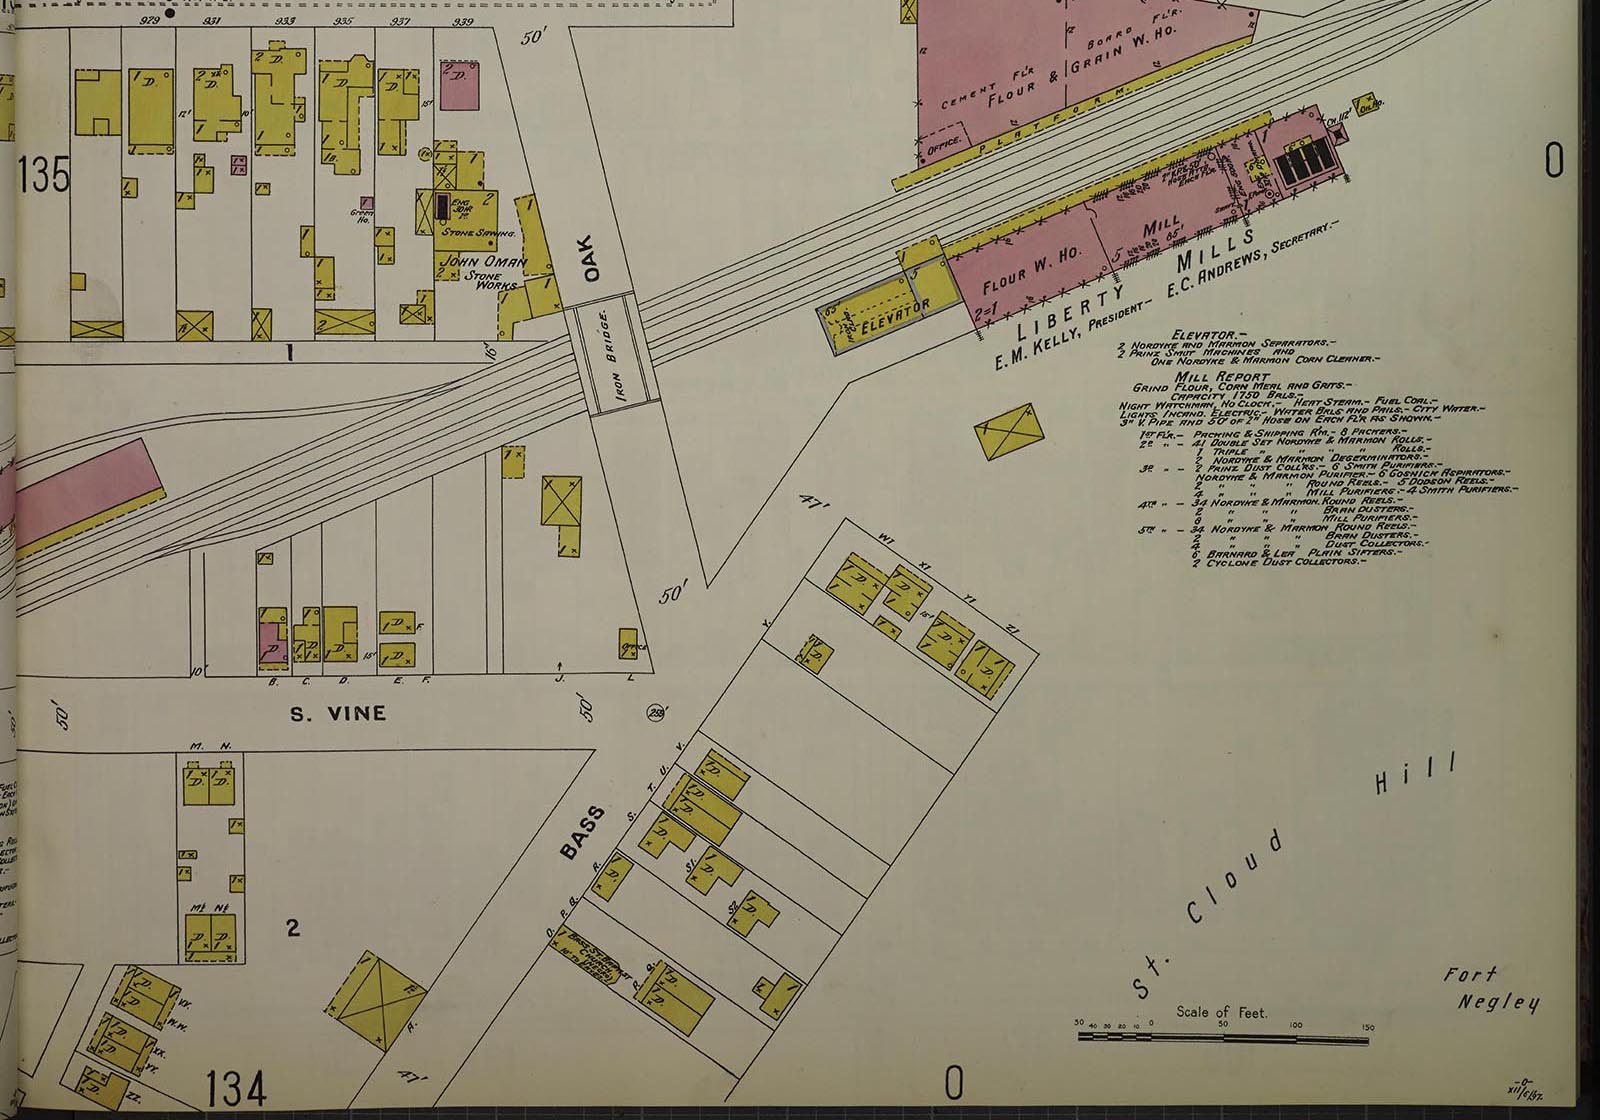 A segment of an 1897 fire insurance map showing land plats and the location of buildings along streets near Fort Negley in Nashville, including Bass Street.